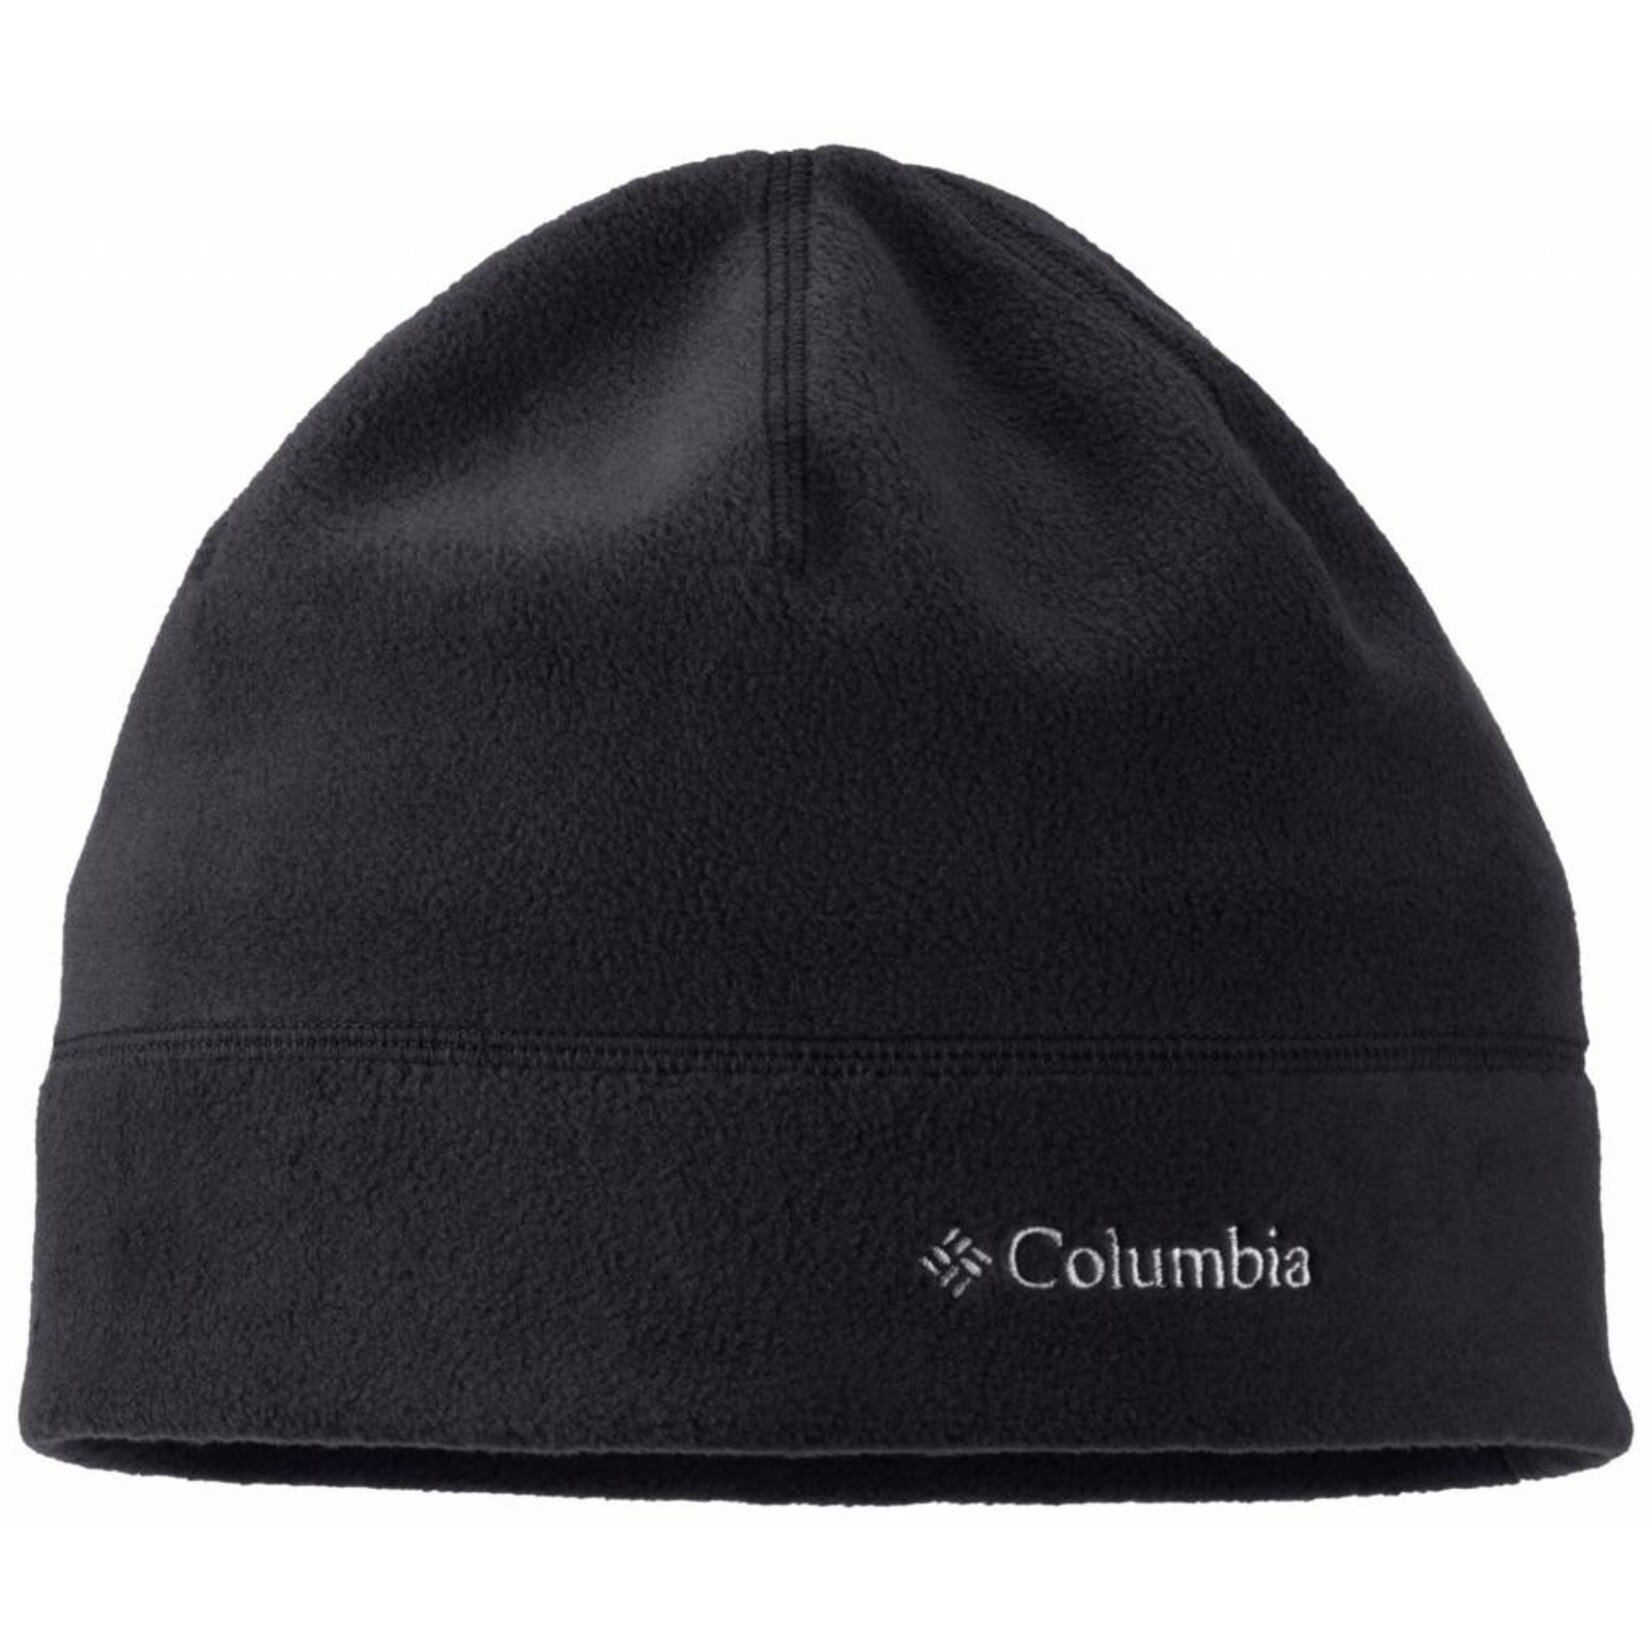 Columbia Youth Thermarator Beanie - Grow Children's Boutique Ltd.